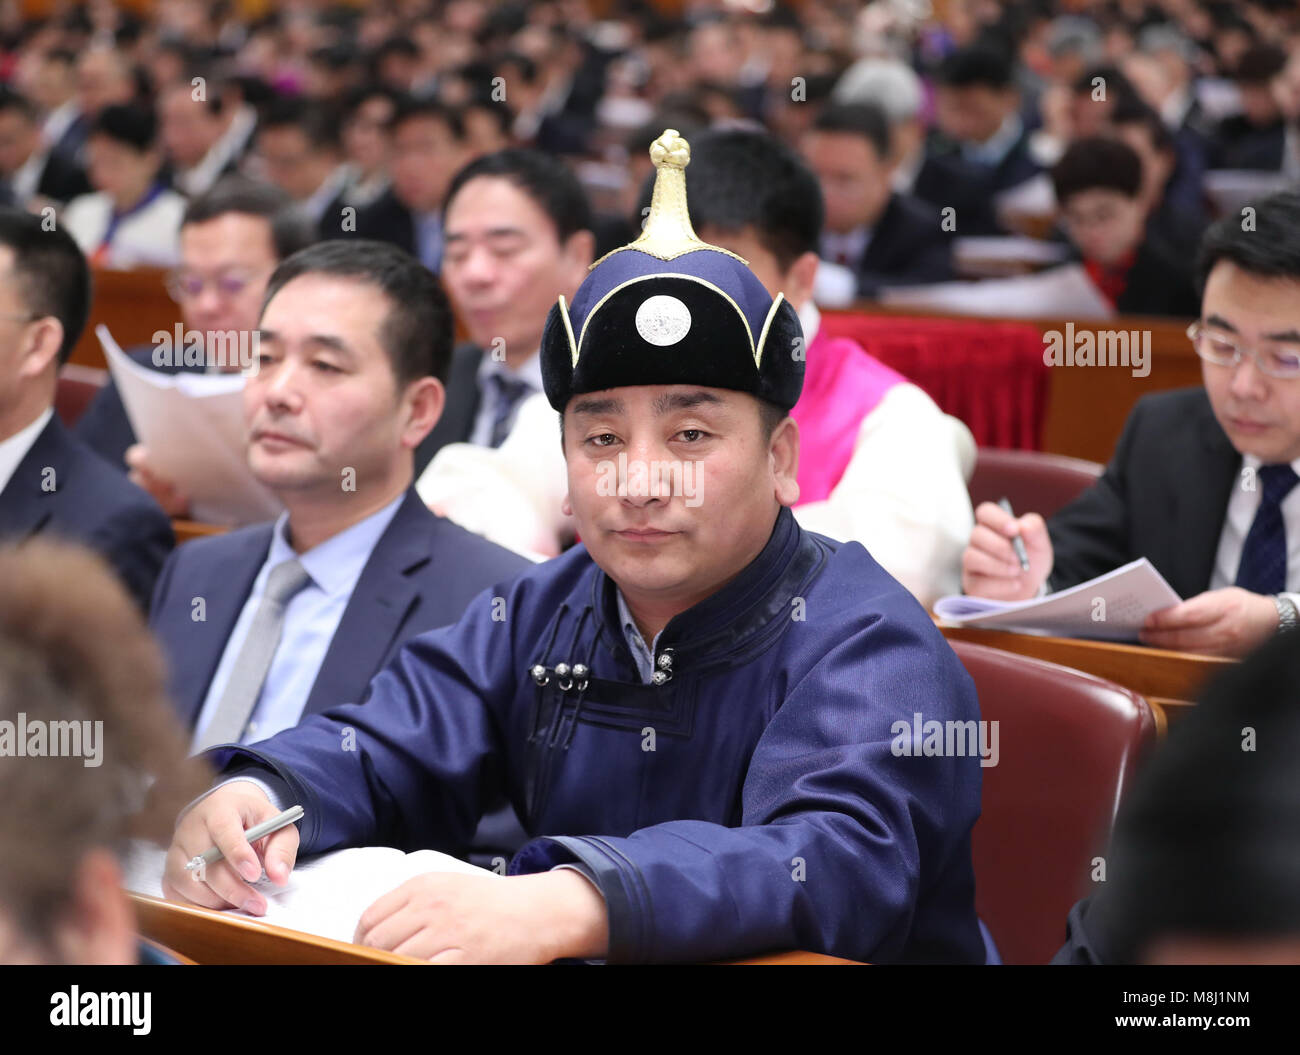 (180318) -- BEIJING, March 18, 2018 (Xinhua) -- Wu Yunbo, a newly-elected deputy to the 13th National People's Congress (NPC), attends the opening meeting of the first session of the 13th NPC at the Great Hall of the People in Beijing, capital of China, March 5, 2018. Wu Yunbo of Mongolia ethnic group comes from Dongsala Village of Jarud Qi (County) of north China's Inner Mongolia Autonomous Region. As a secretary of the Communist Party of China local branch in the Dongsala Village, he initiated a cooperative in 2013 and explored a way to get people out of poverty. Farmers and herdsmen were Stock Photo